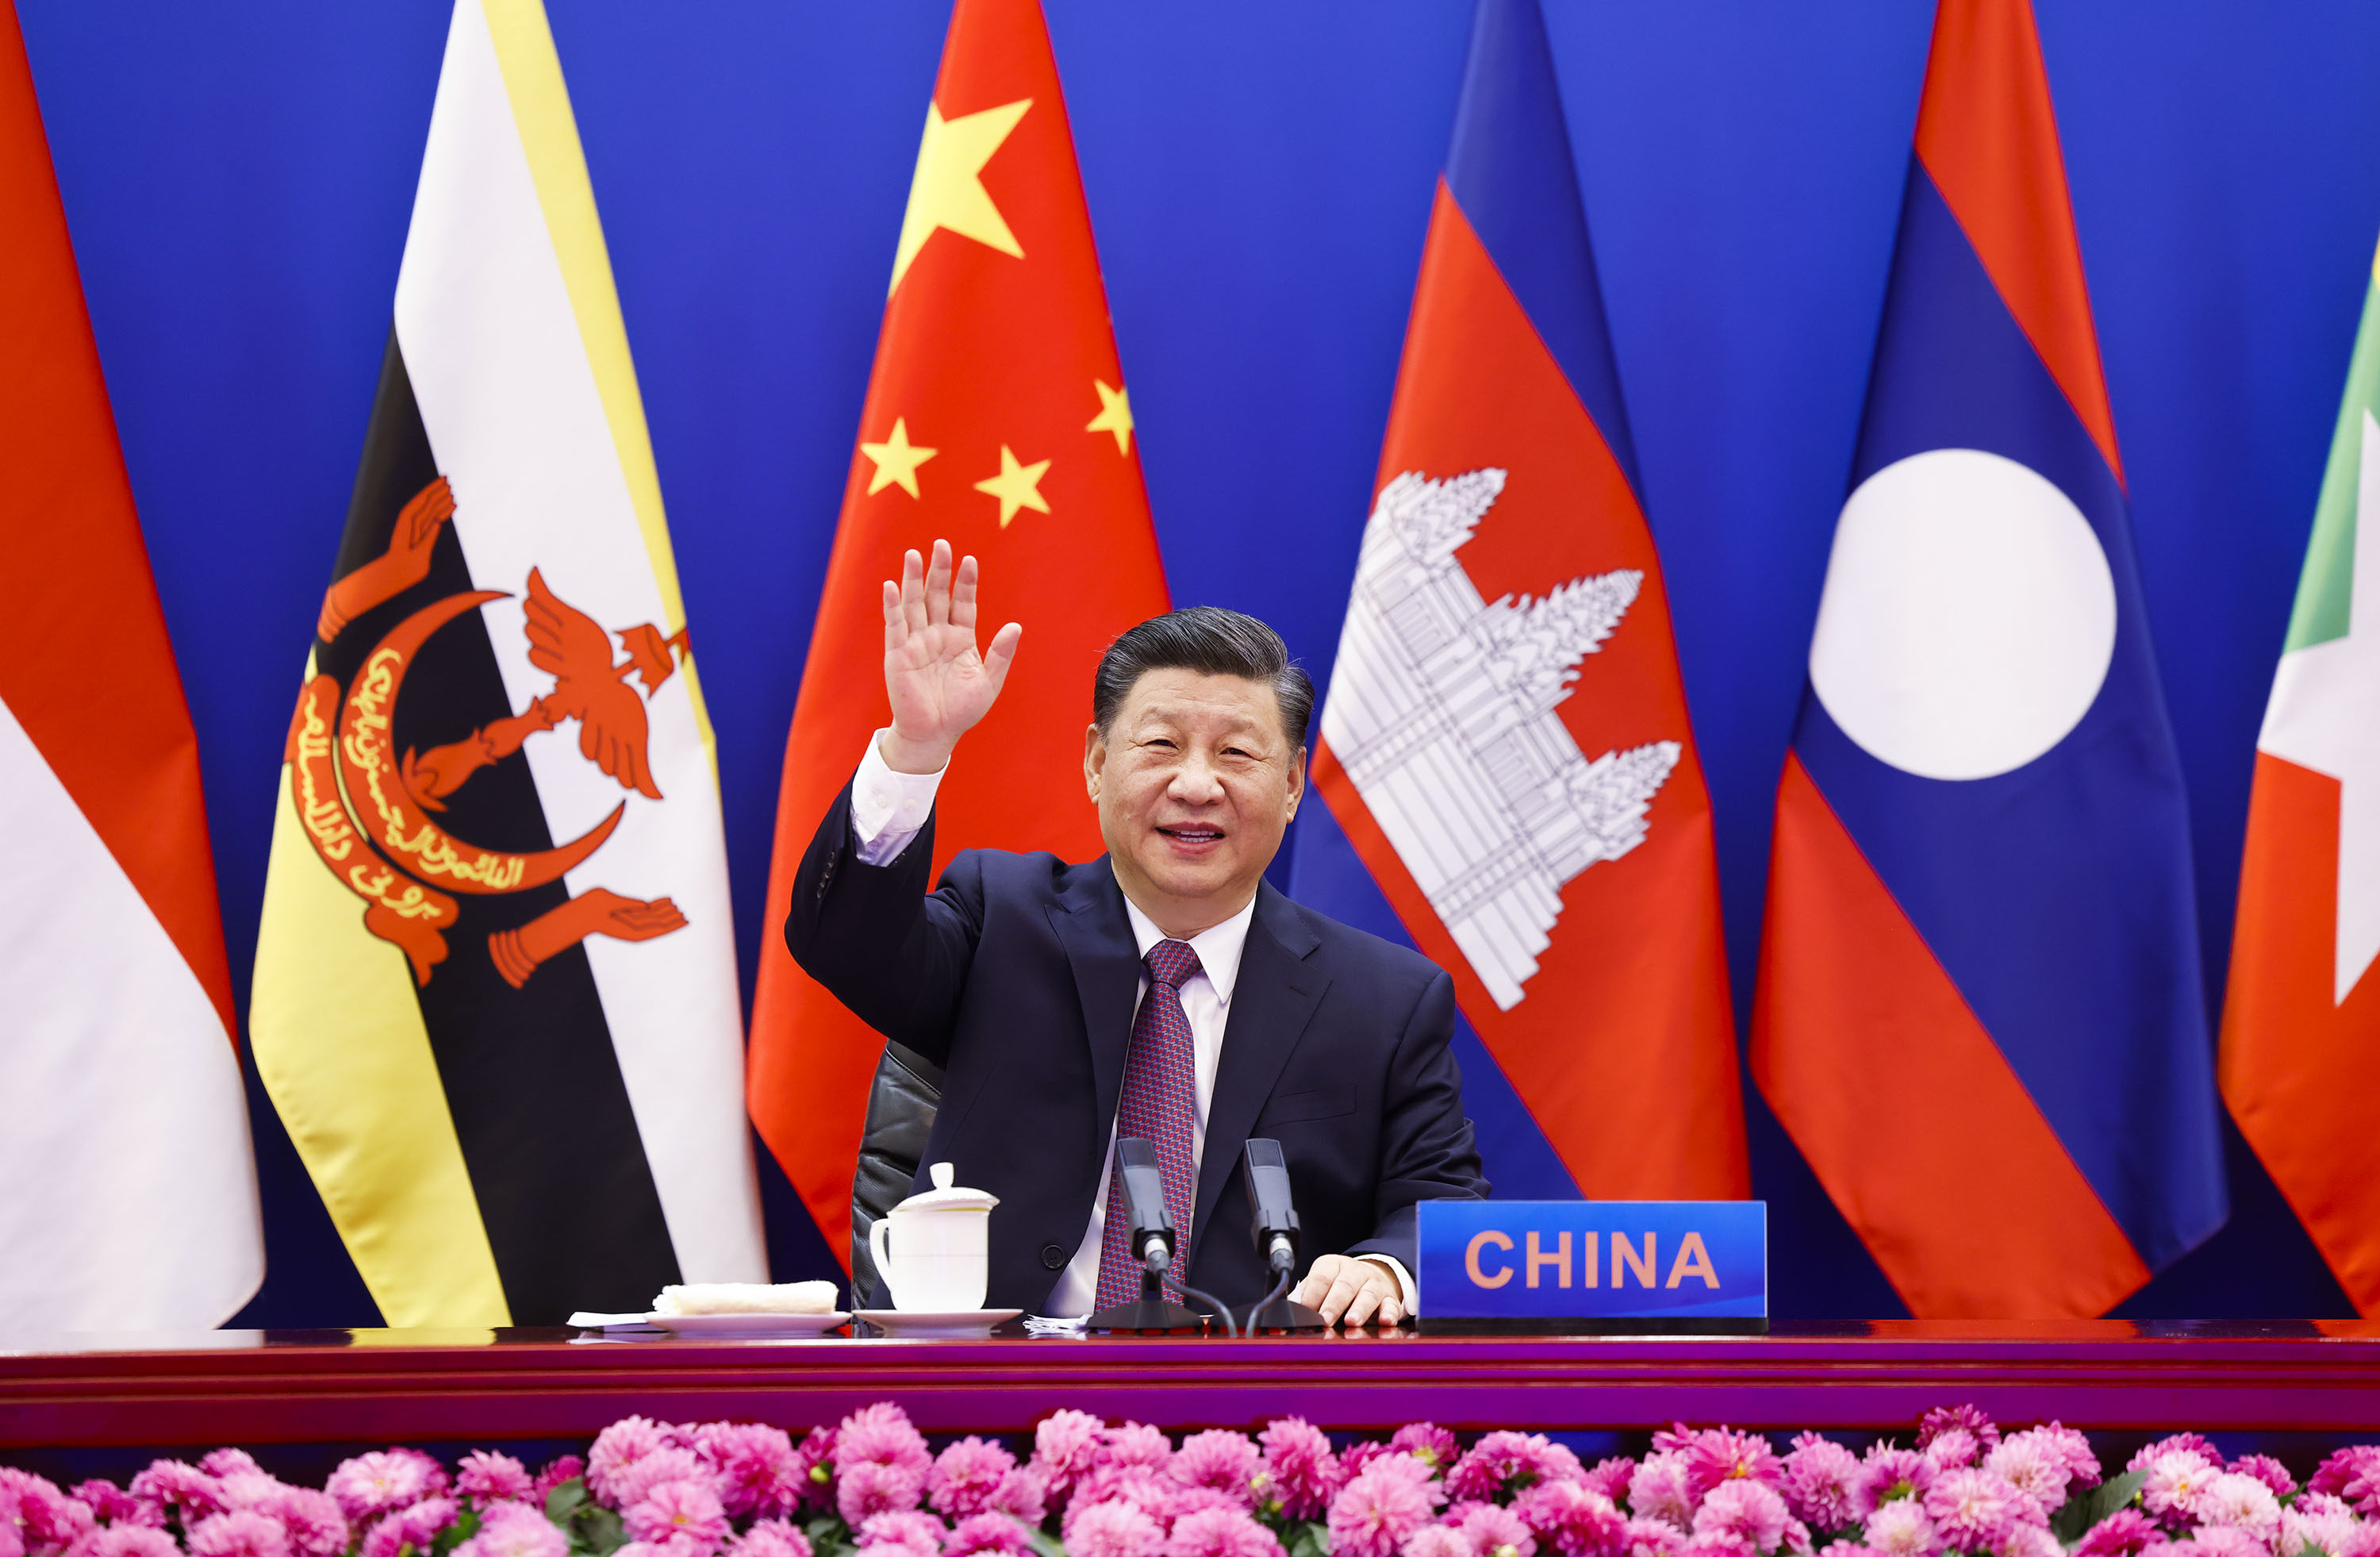 Chinese President Xi Jinping chairs a special Asean-China summit last year via video link from Beijing. Photo: Xinhua